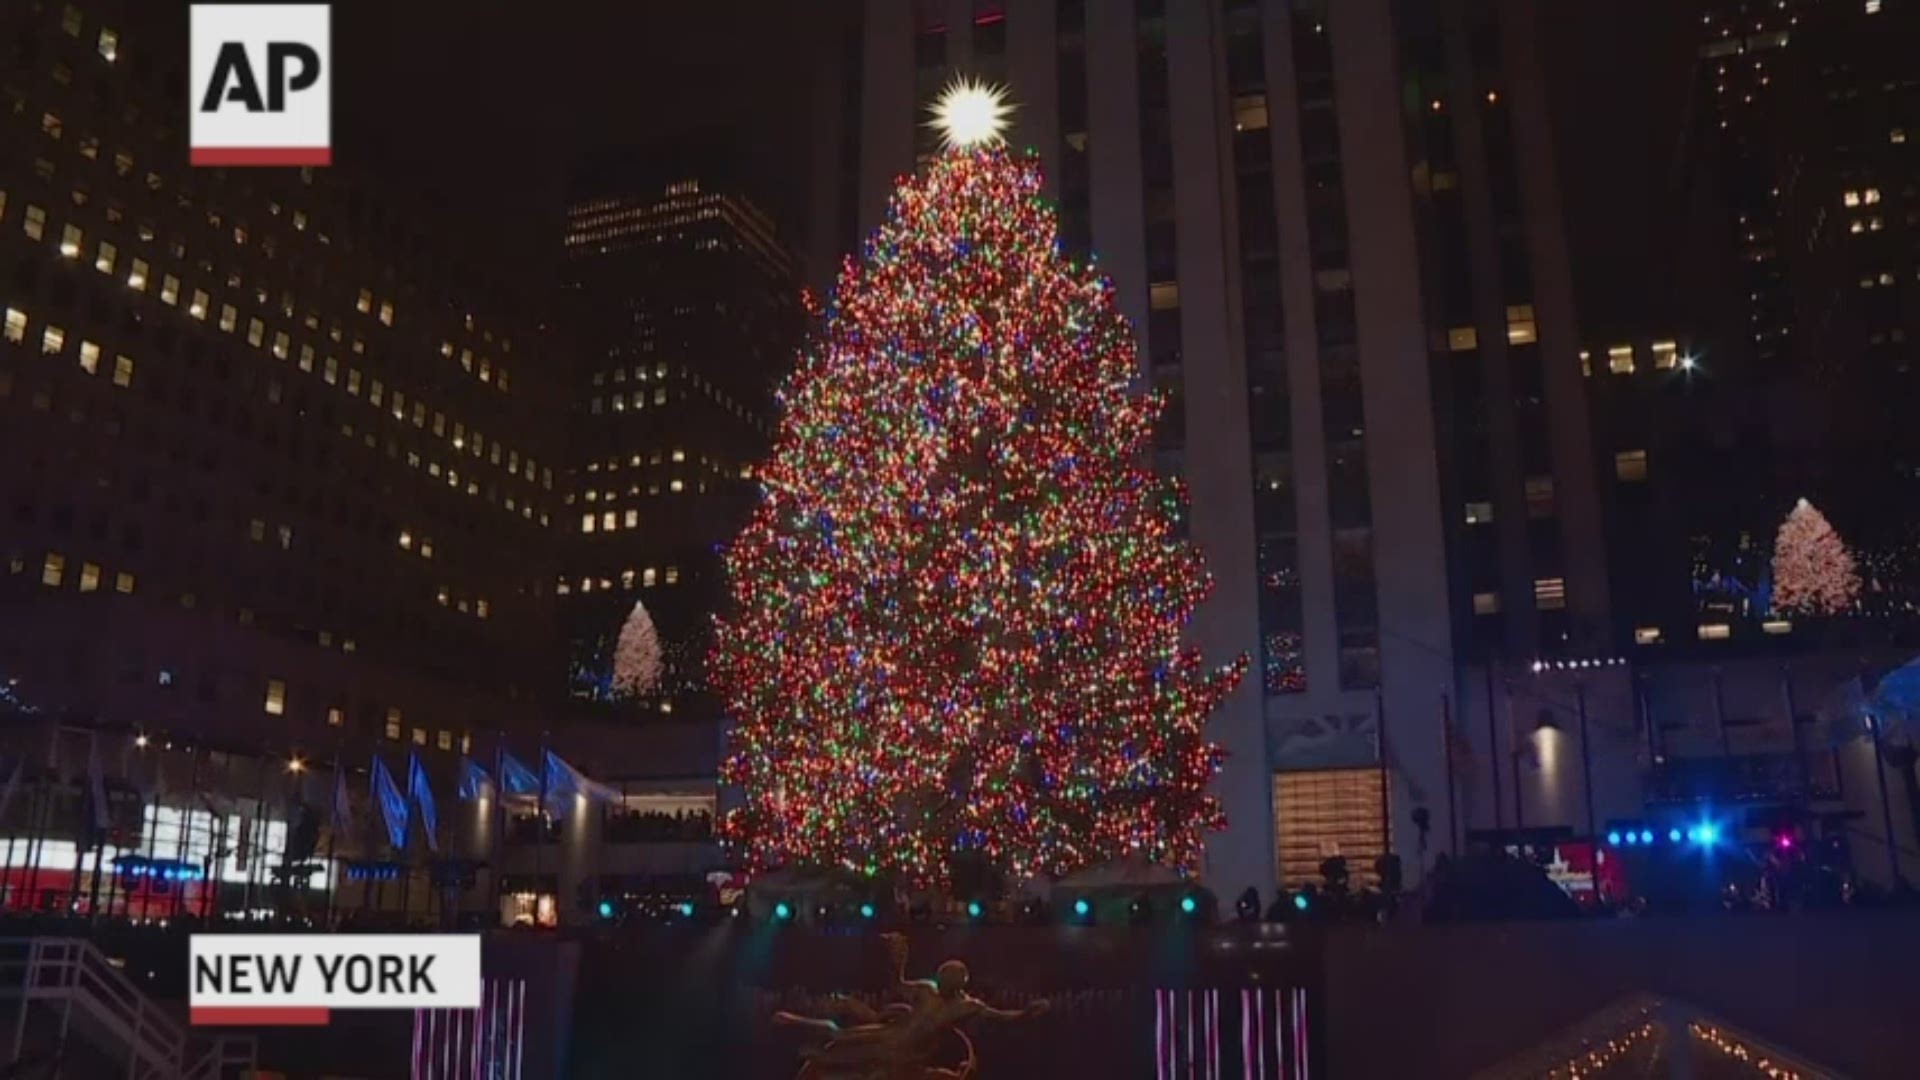 A massive Norway spruce has been lit up in a tradition that ushers in Christmastime in New York City. Mayor Bill de Blasio flipped the switch Wednesday night to light the Rockefeller Center Christmas Tree. (AP)